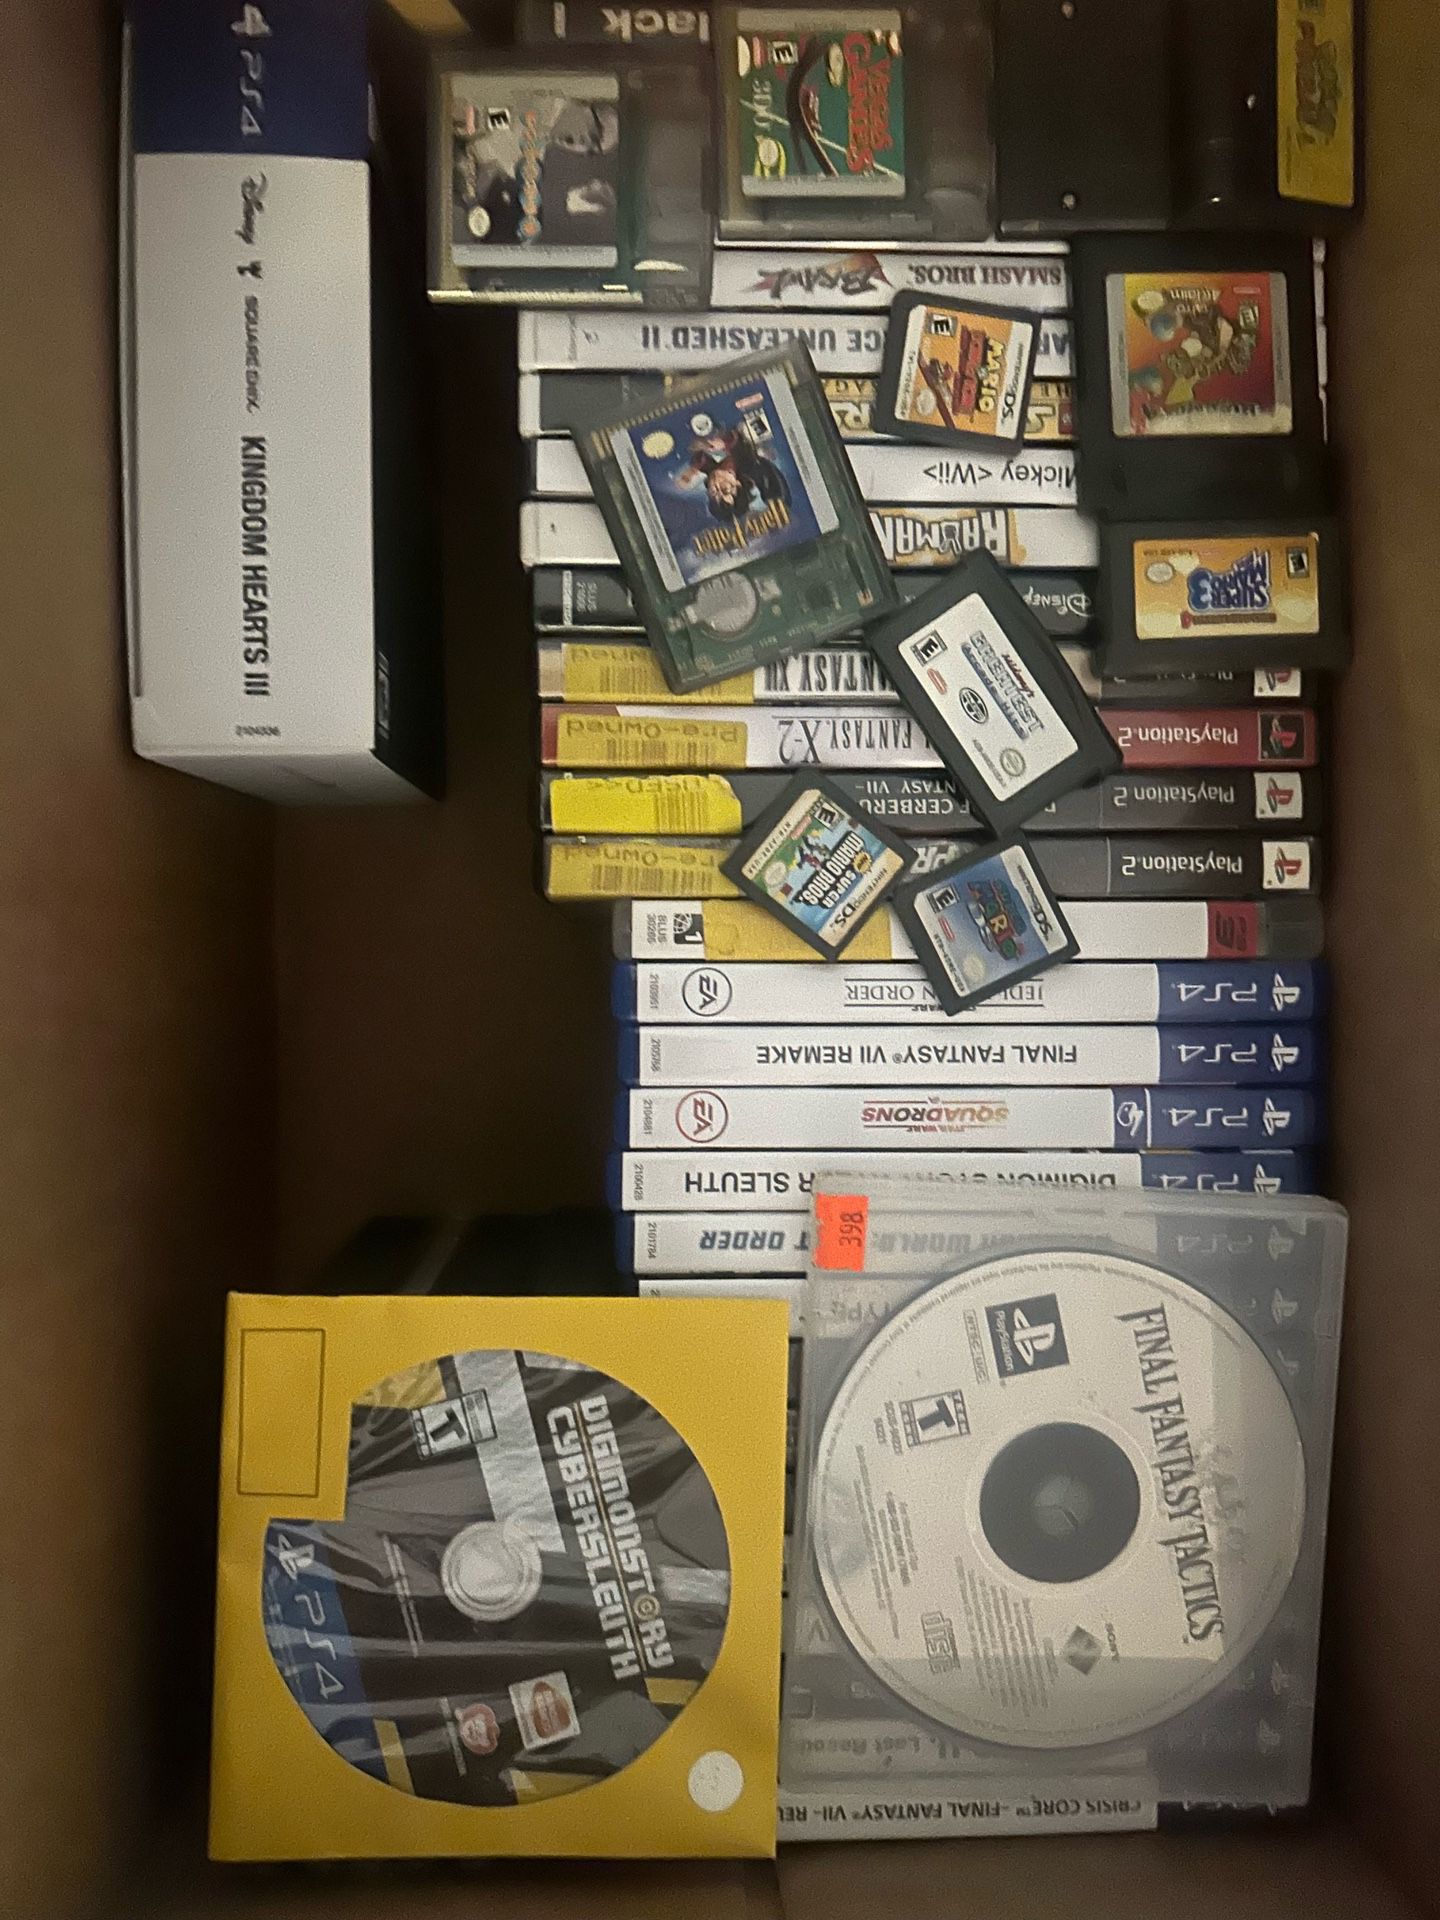 Gaming Collection (Wii, Ps2, PS3, PS4 Consoles… Lots Of Games Including Nintendo DS, GBA, GBC, Xbox, Xbox360, Ps1/2/3/4 Sell As Whole Or Individually)